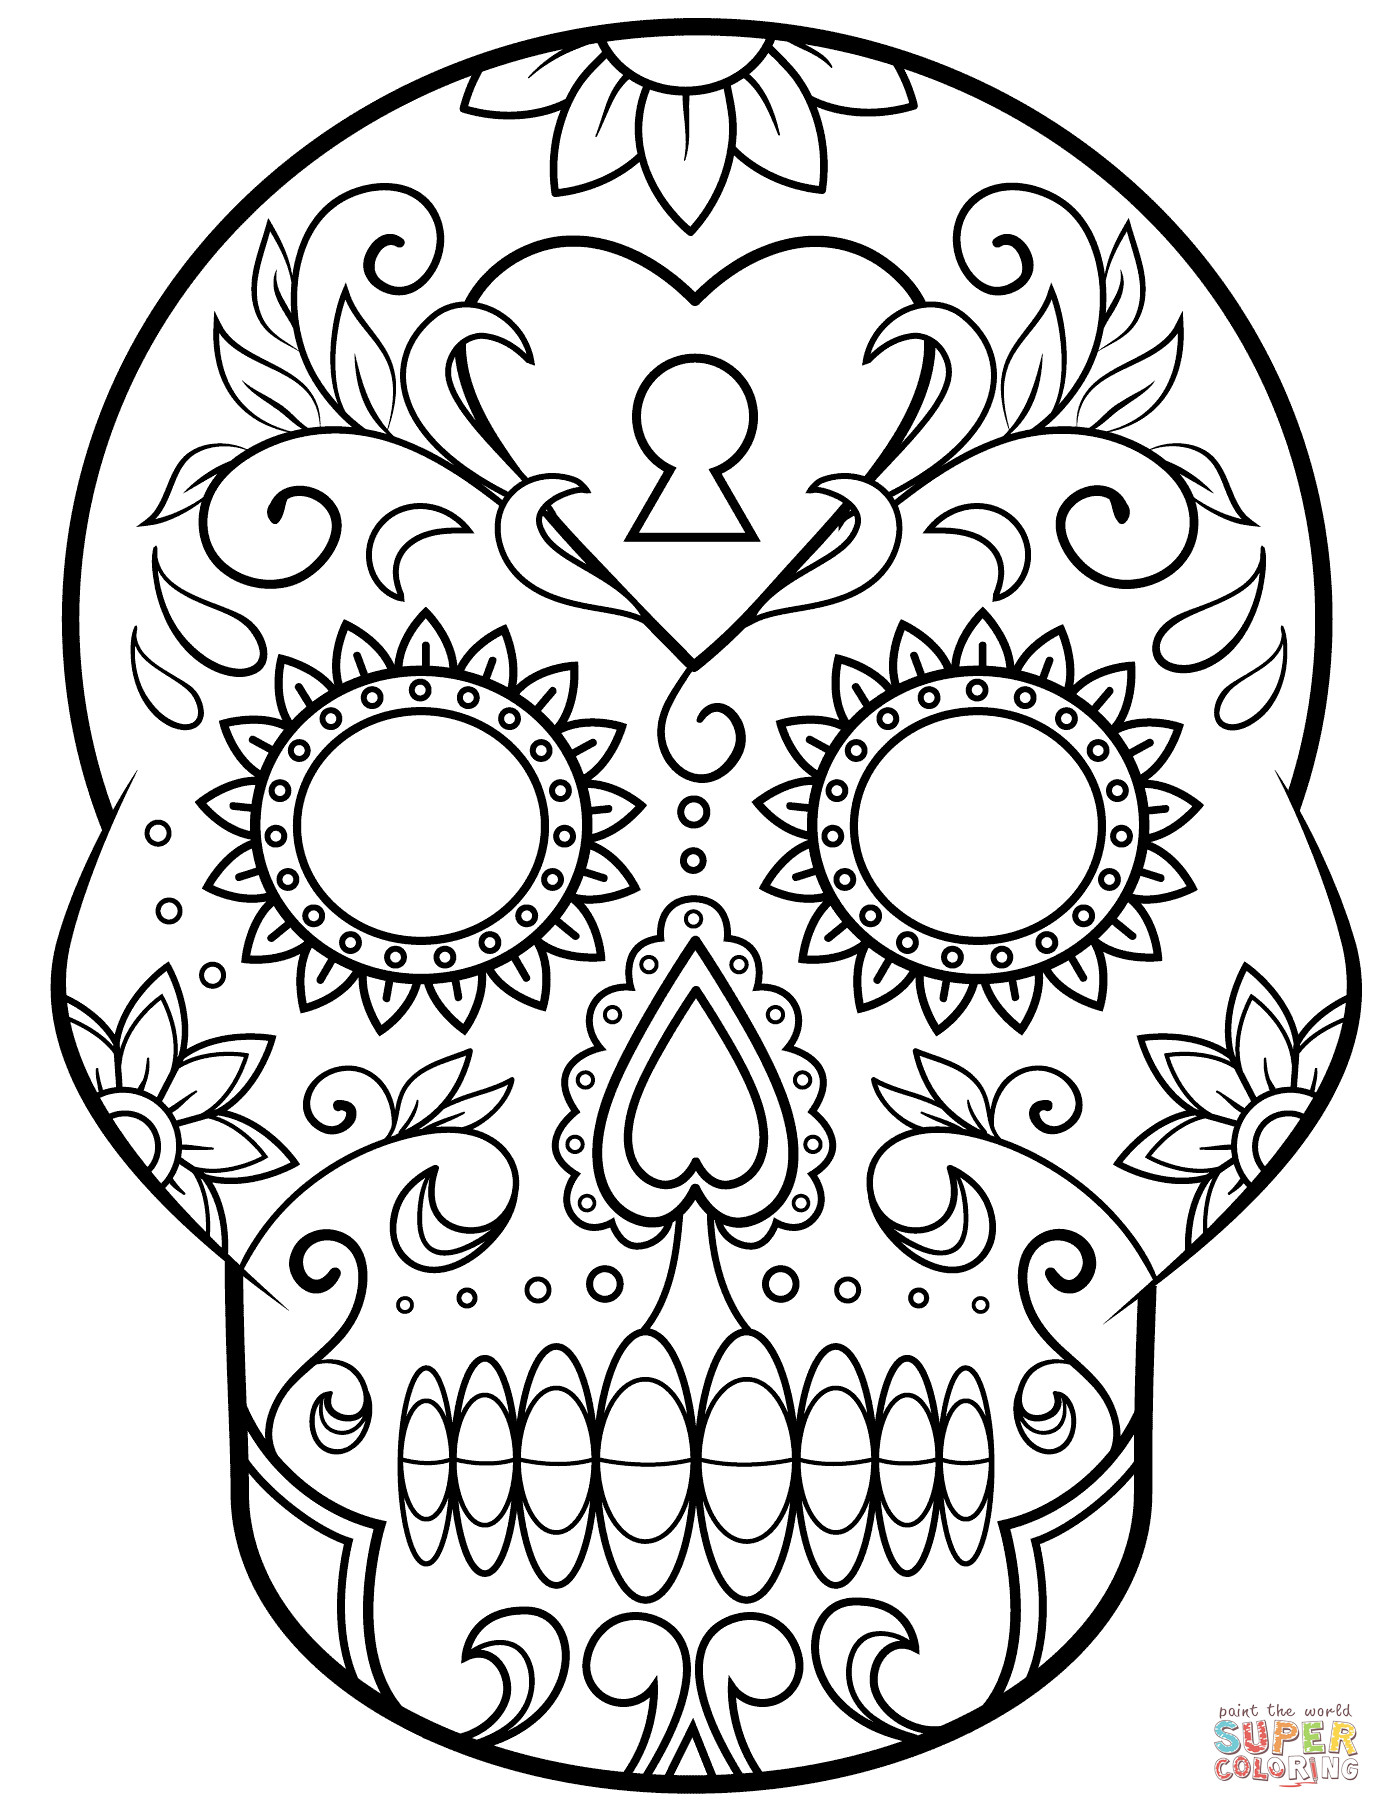 Free Printable Sugar Skull Coloring Pages
 Day of the Dead Sugar Skull coloring page